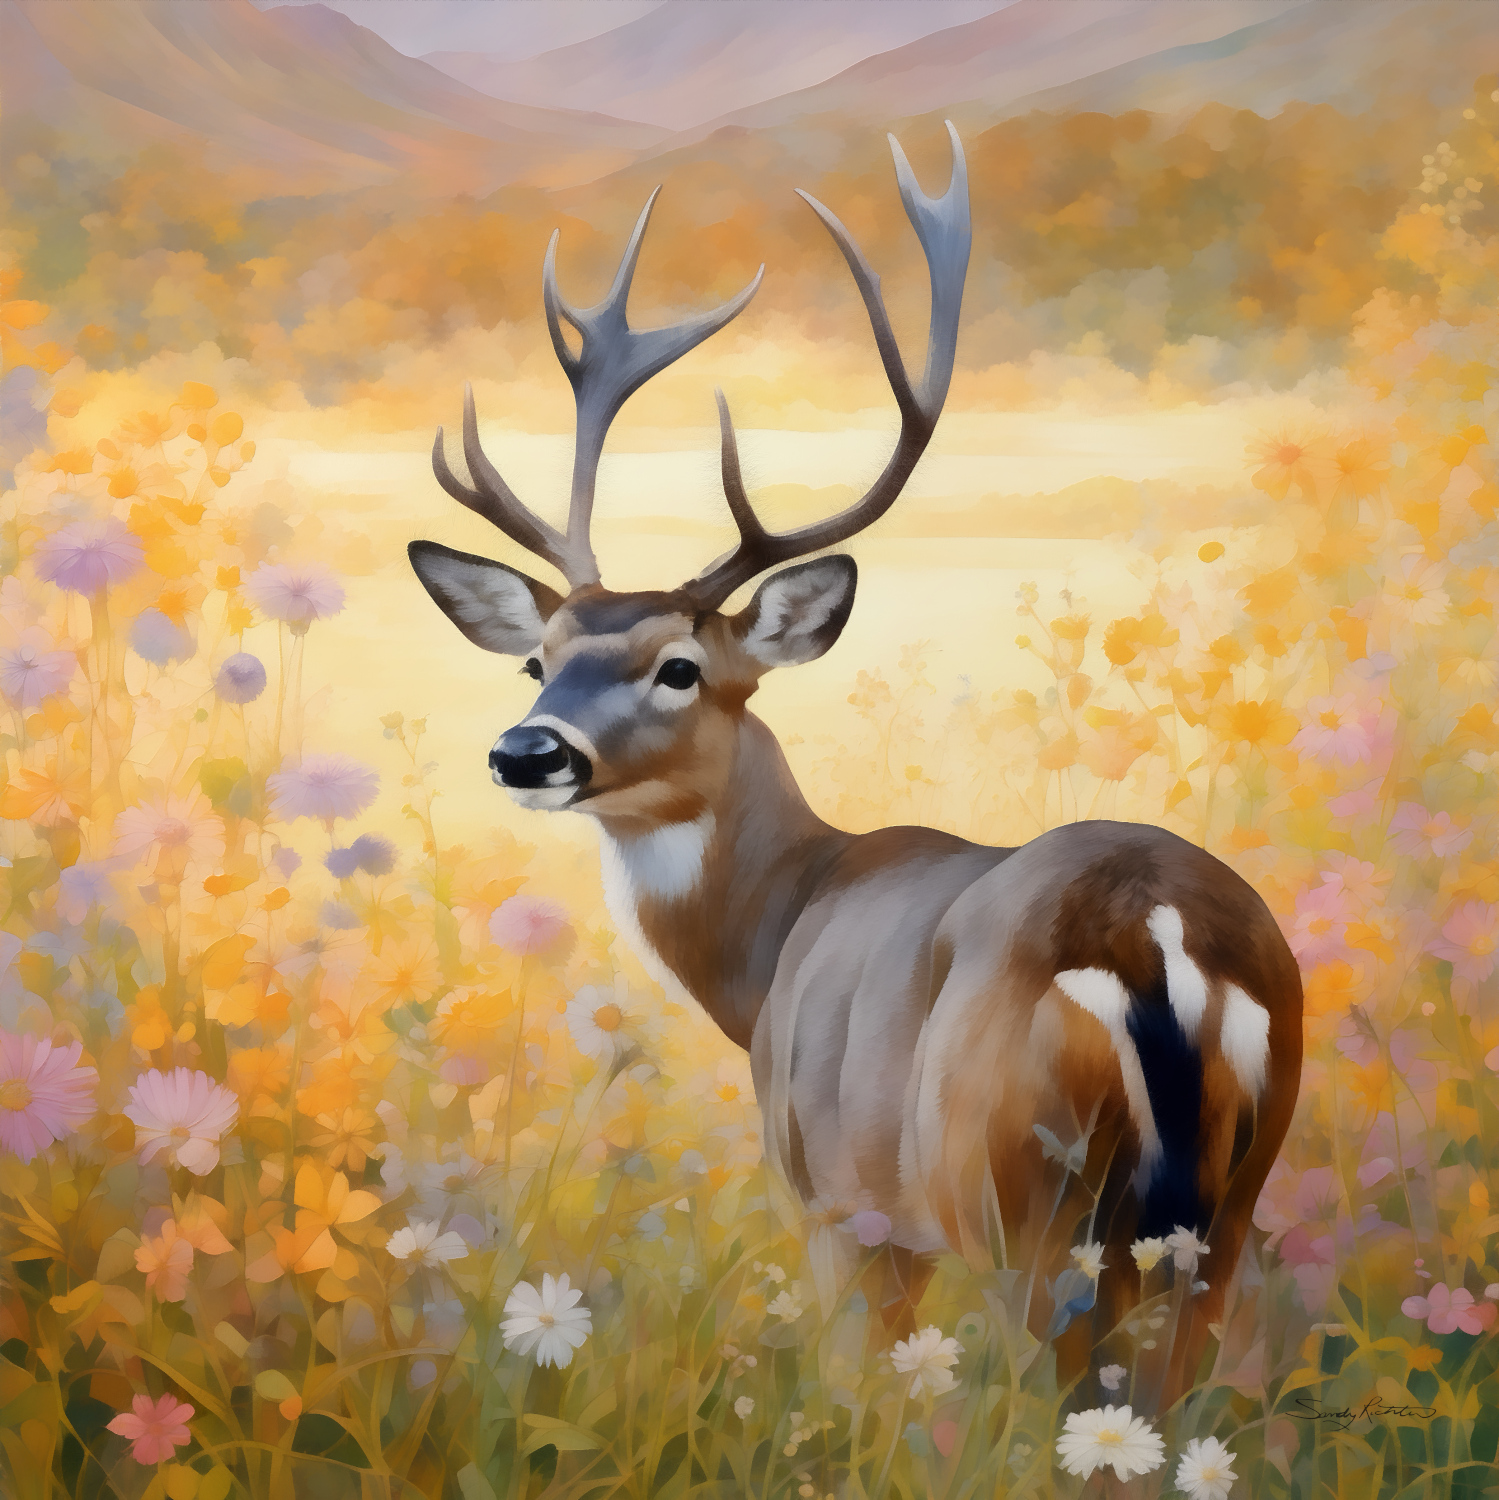 Majestic Young Deer in Wildflowers Painting Nature's beauty captured in paint 🎨🌸🦌